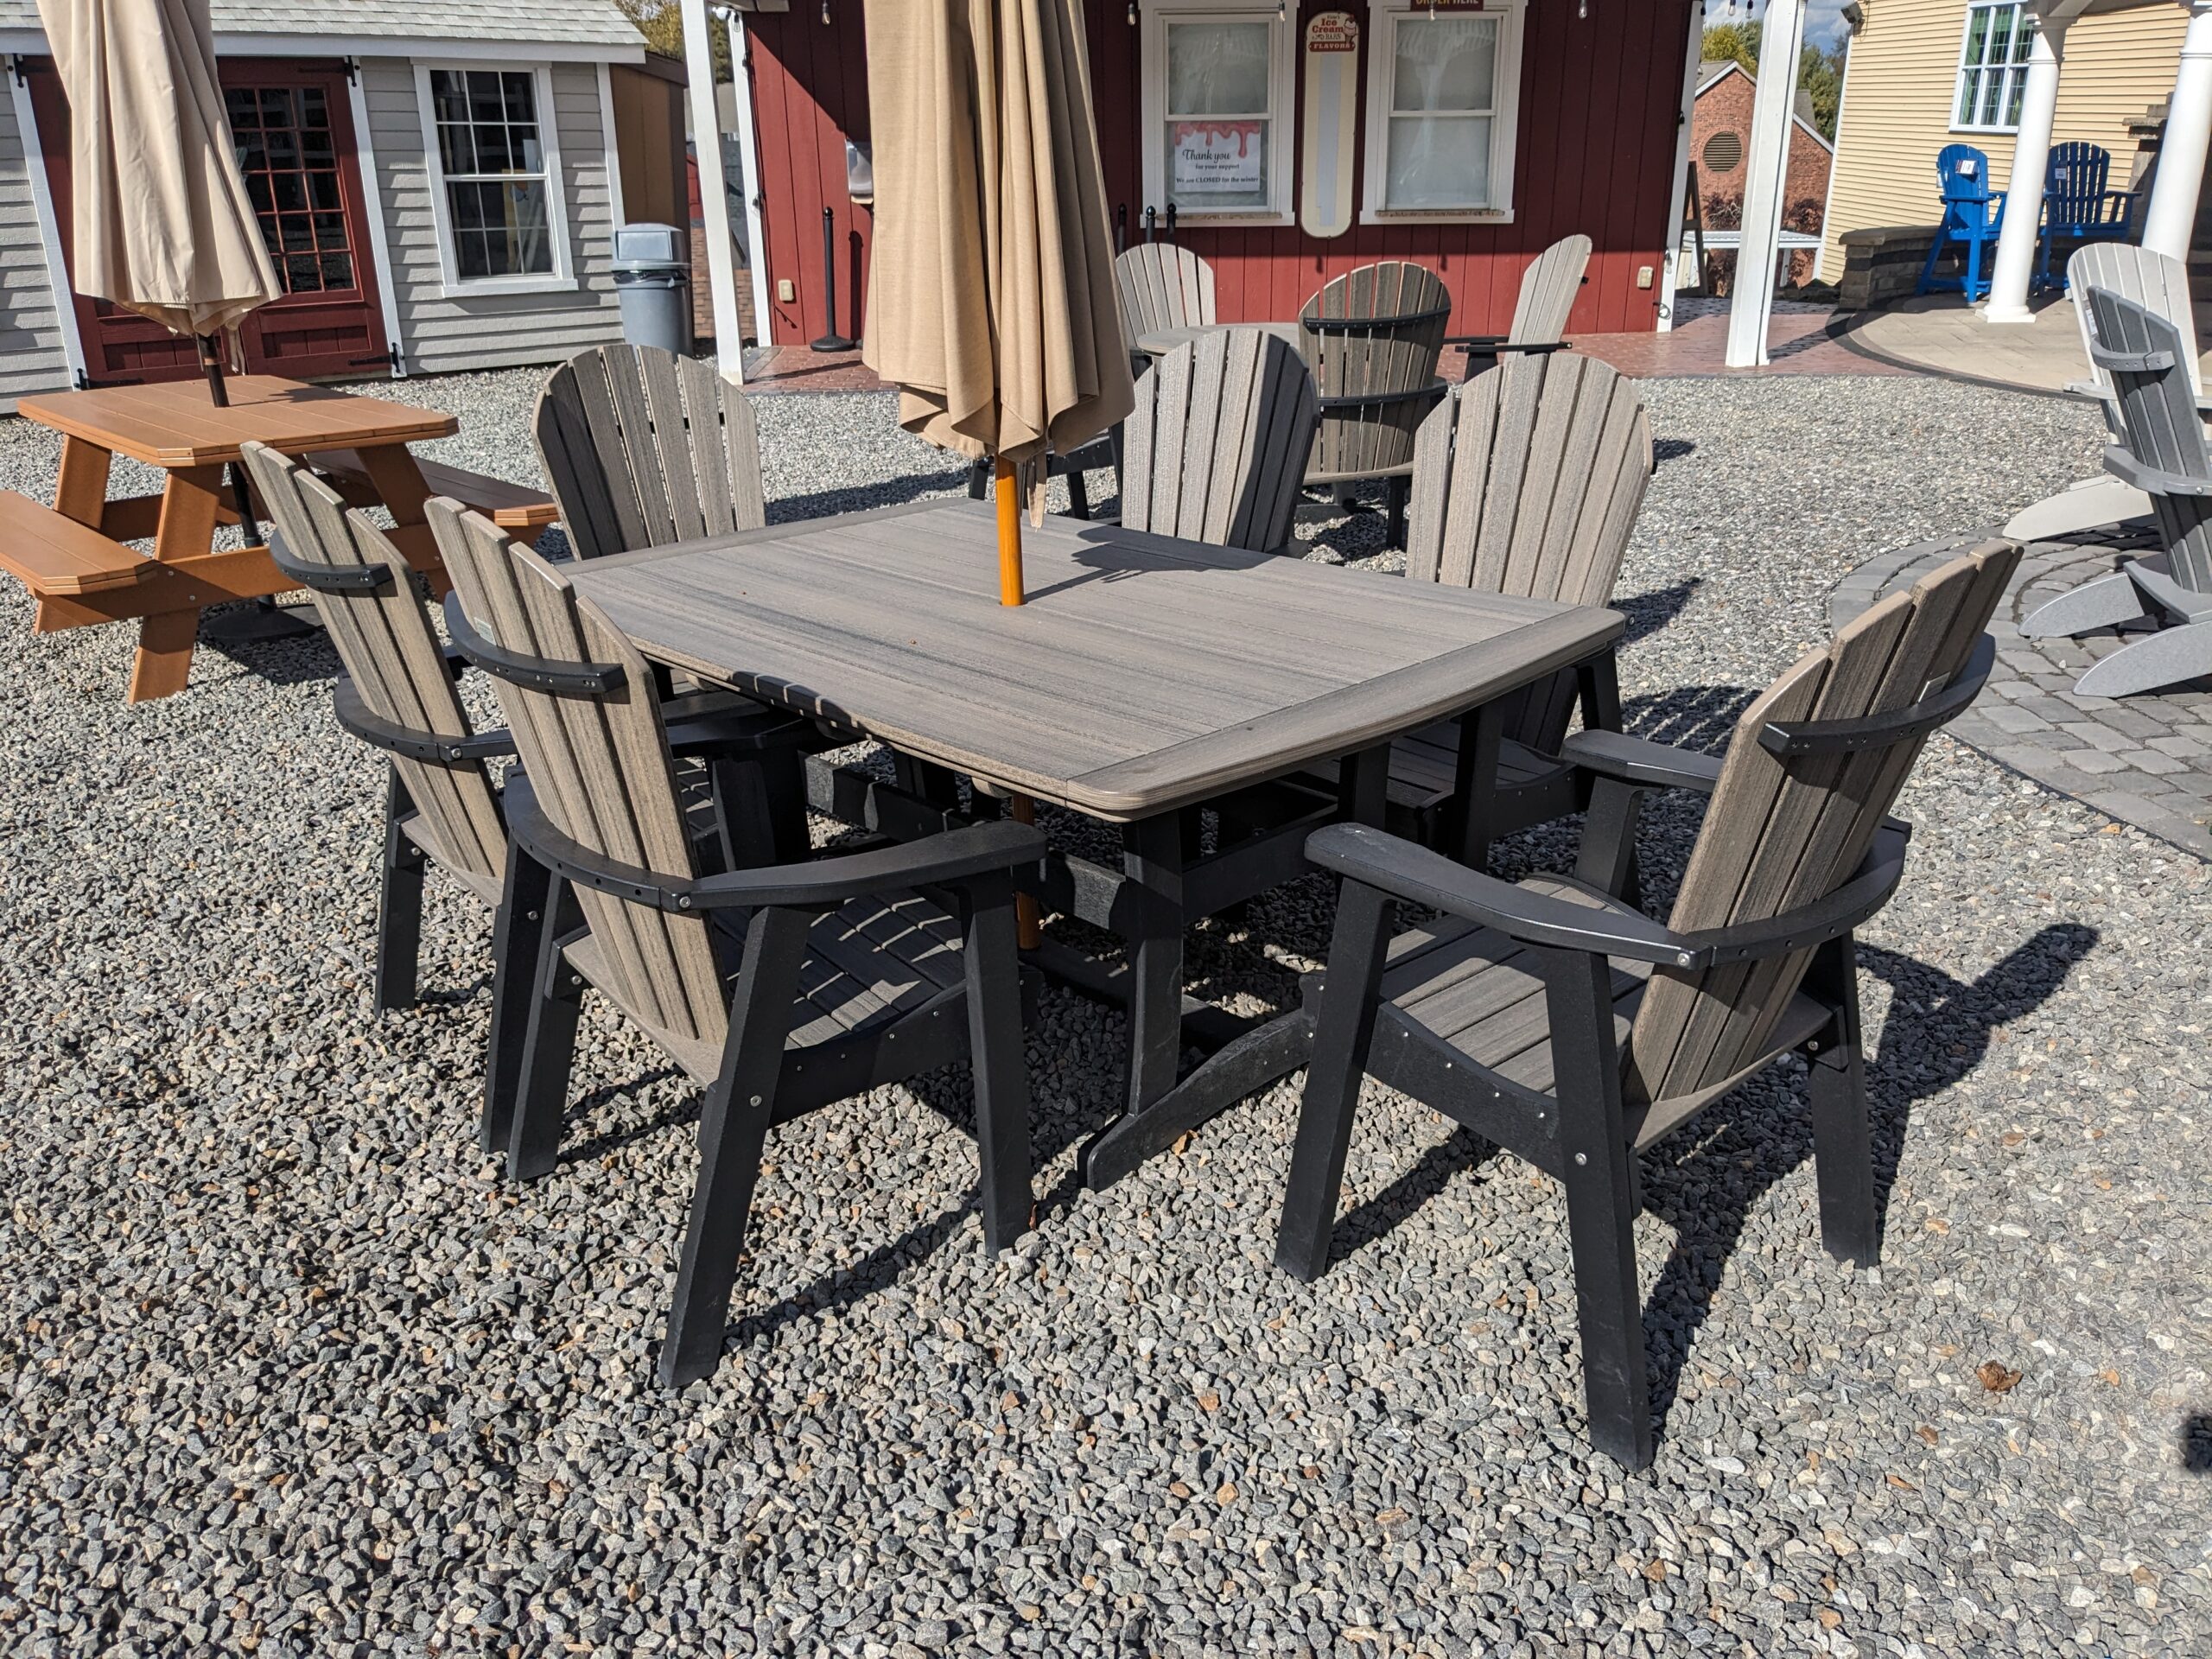 4' x 6' Dining Table Set #12